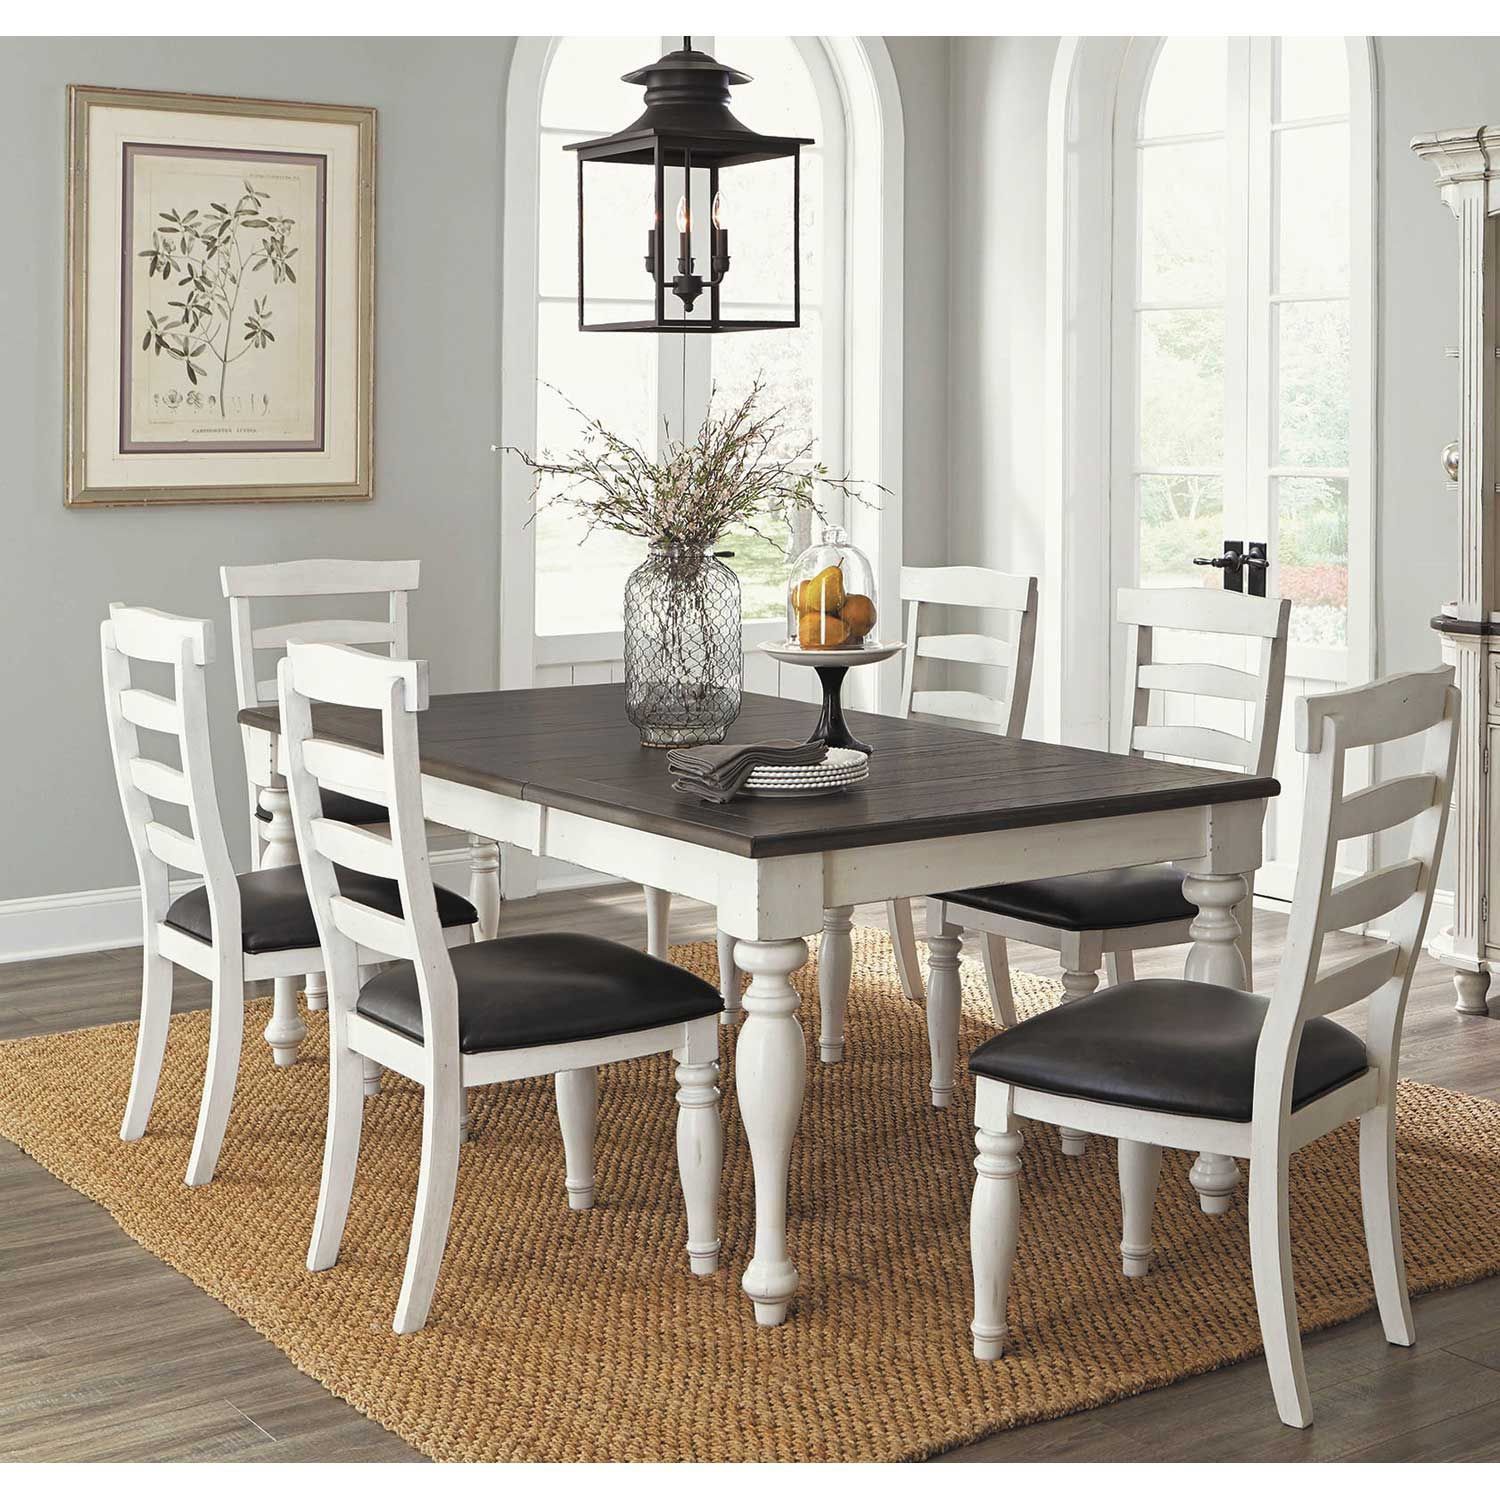 Greta Rectangle Dining Table, Bernie And Phyls Dining Room Sets